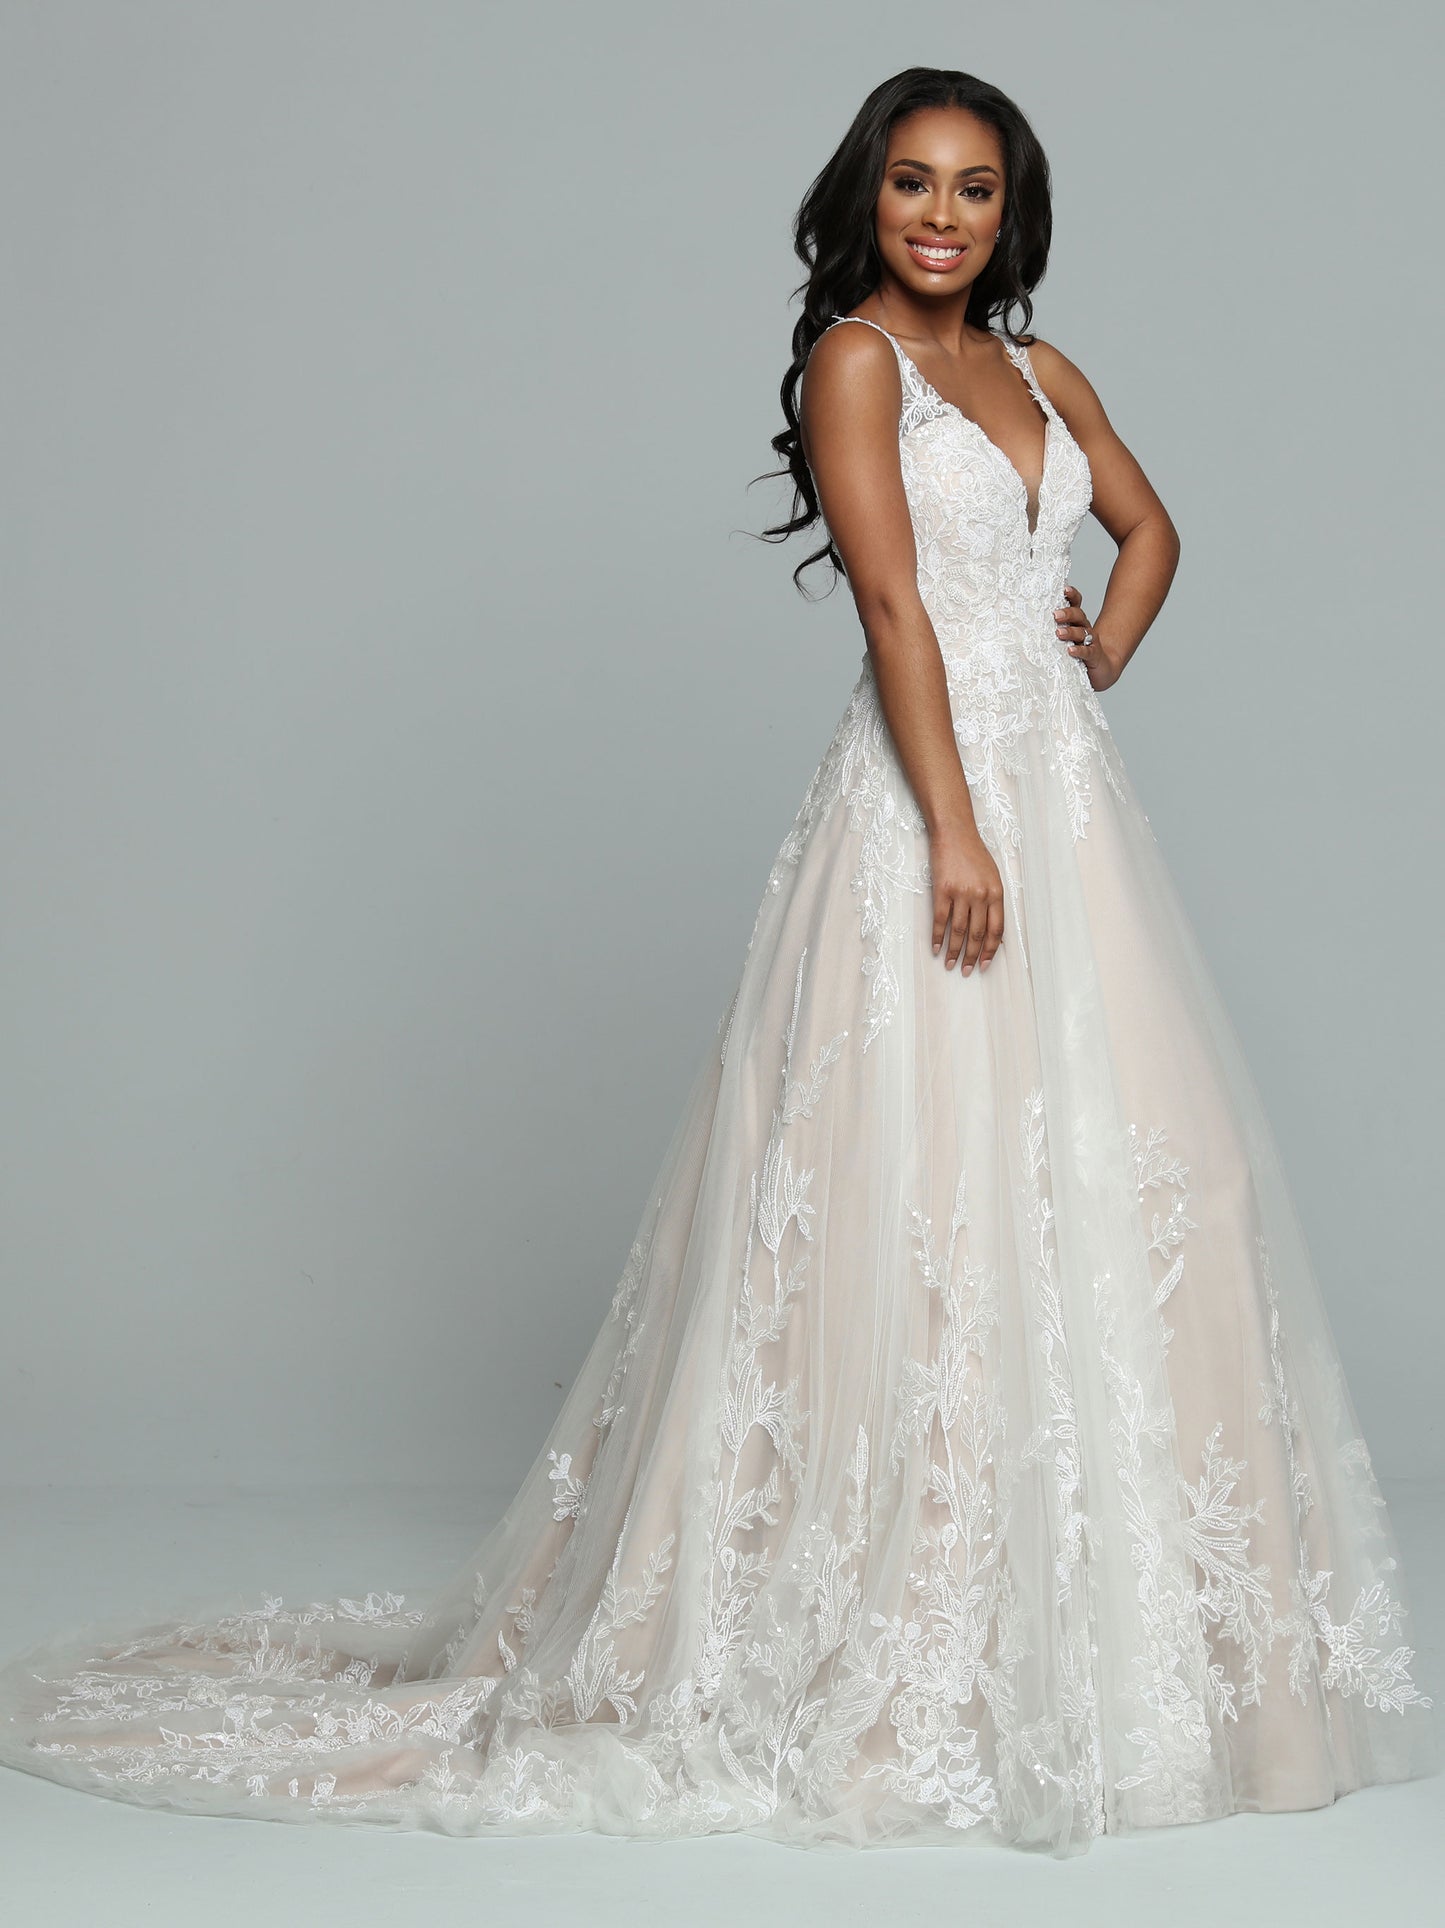 Davinci Bridal 50672 A line Lace Ballgown Wedding Dress Sheer Back Bridal Gown Beautiful Tulle A-Line Wedding Dress with a Ball Gown Vibe features a Deep V-Neckline with Sheer Modesty Panel. Lightly Beaded Lace Applique Covers the Bodice & frames the Sheer Back. More Lace Applique highlights the Full Skirt & Chapel Length Train. Sparkling Sequin Accents & Covered Buttons finish the look.